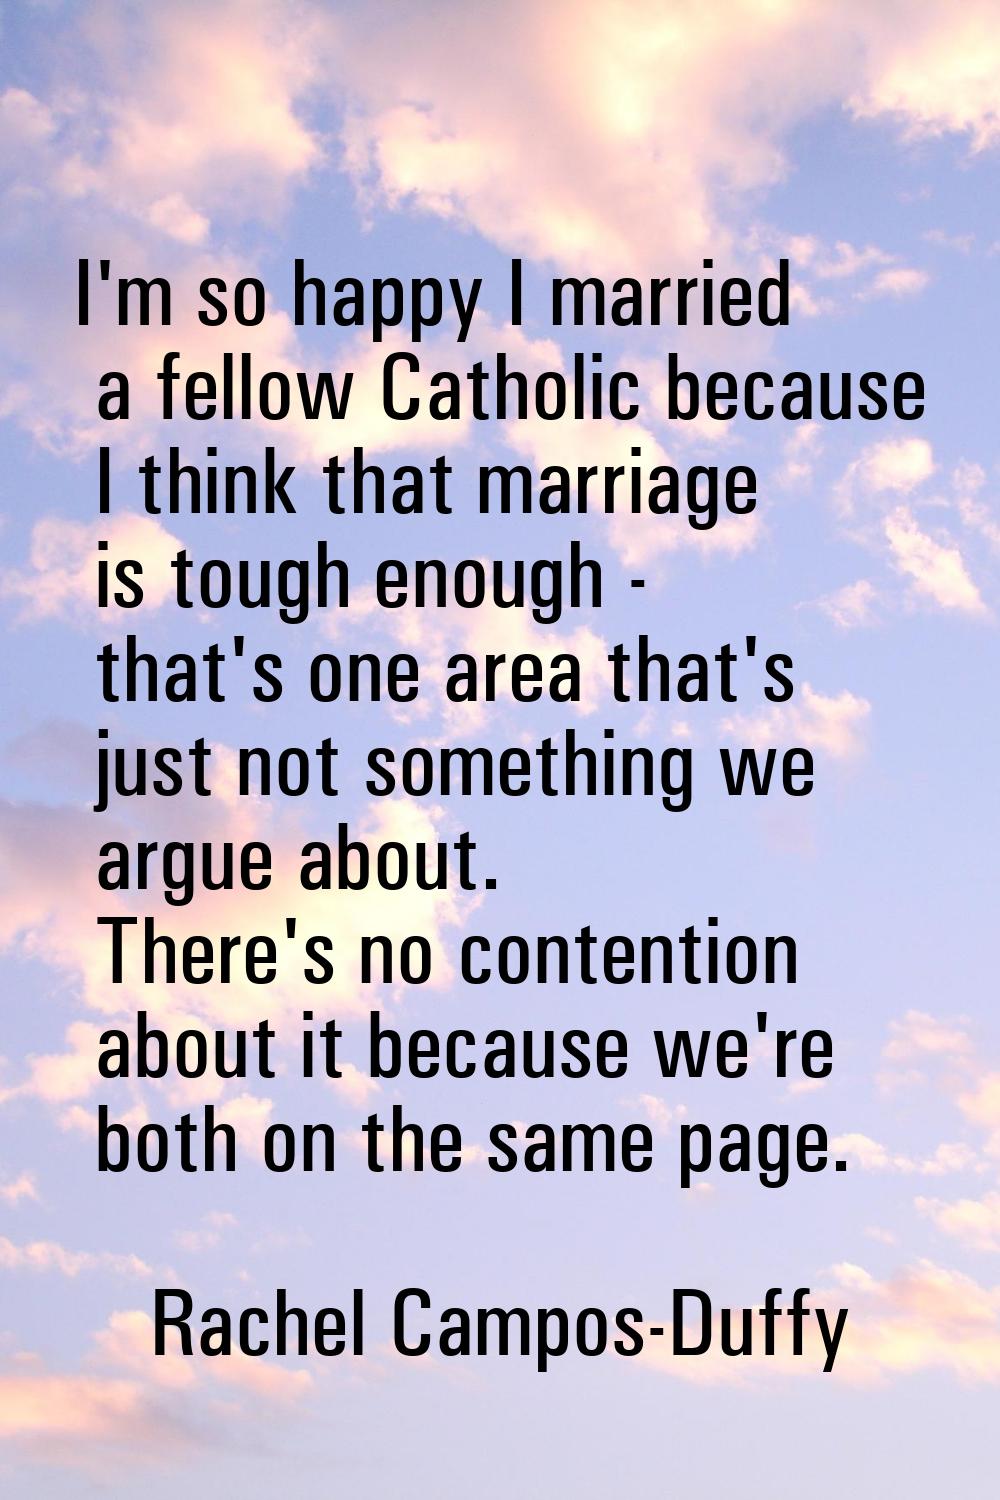 I'm so happy I married a fellow Catholic because I think that marriage is tough enough - that's one